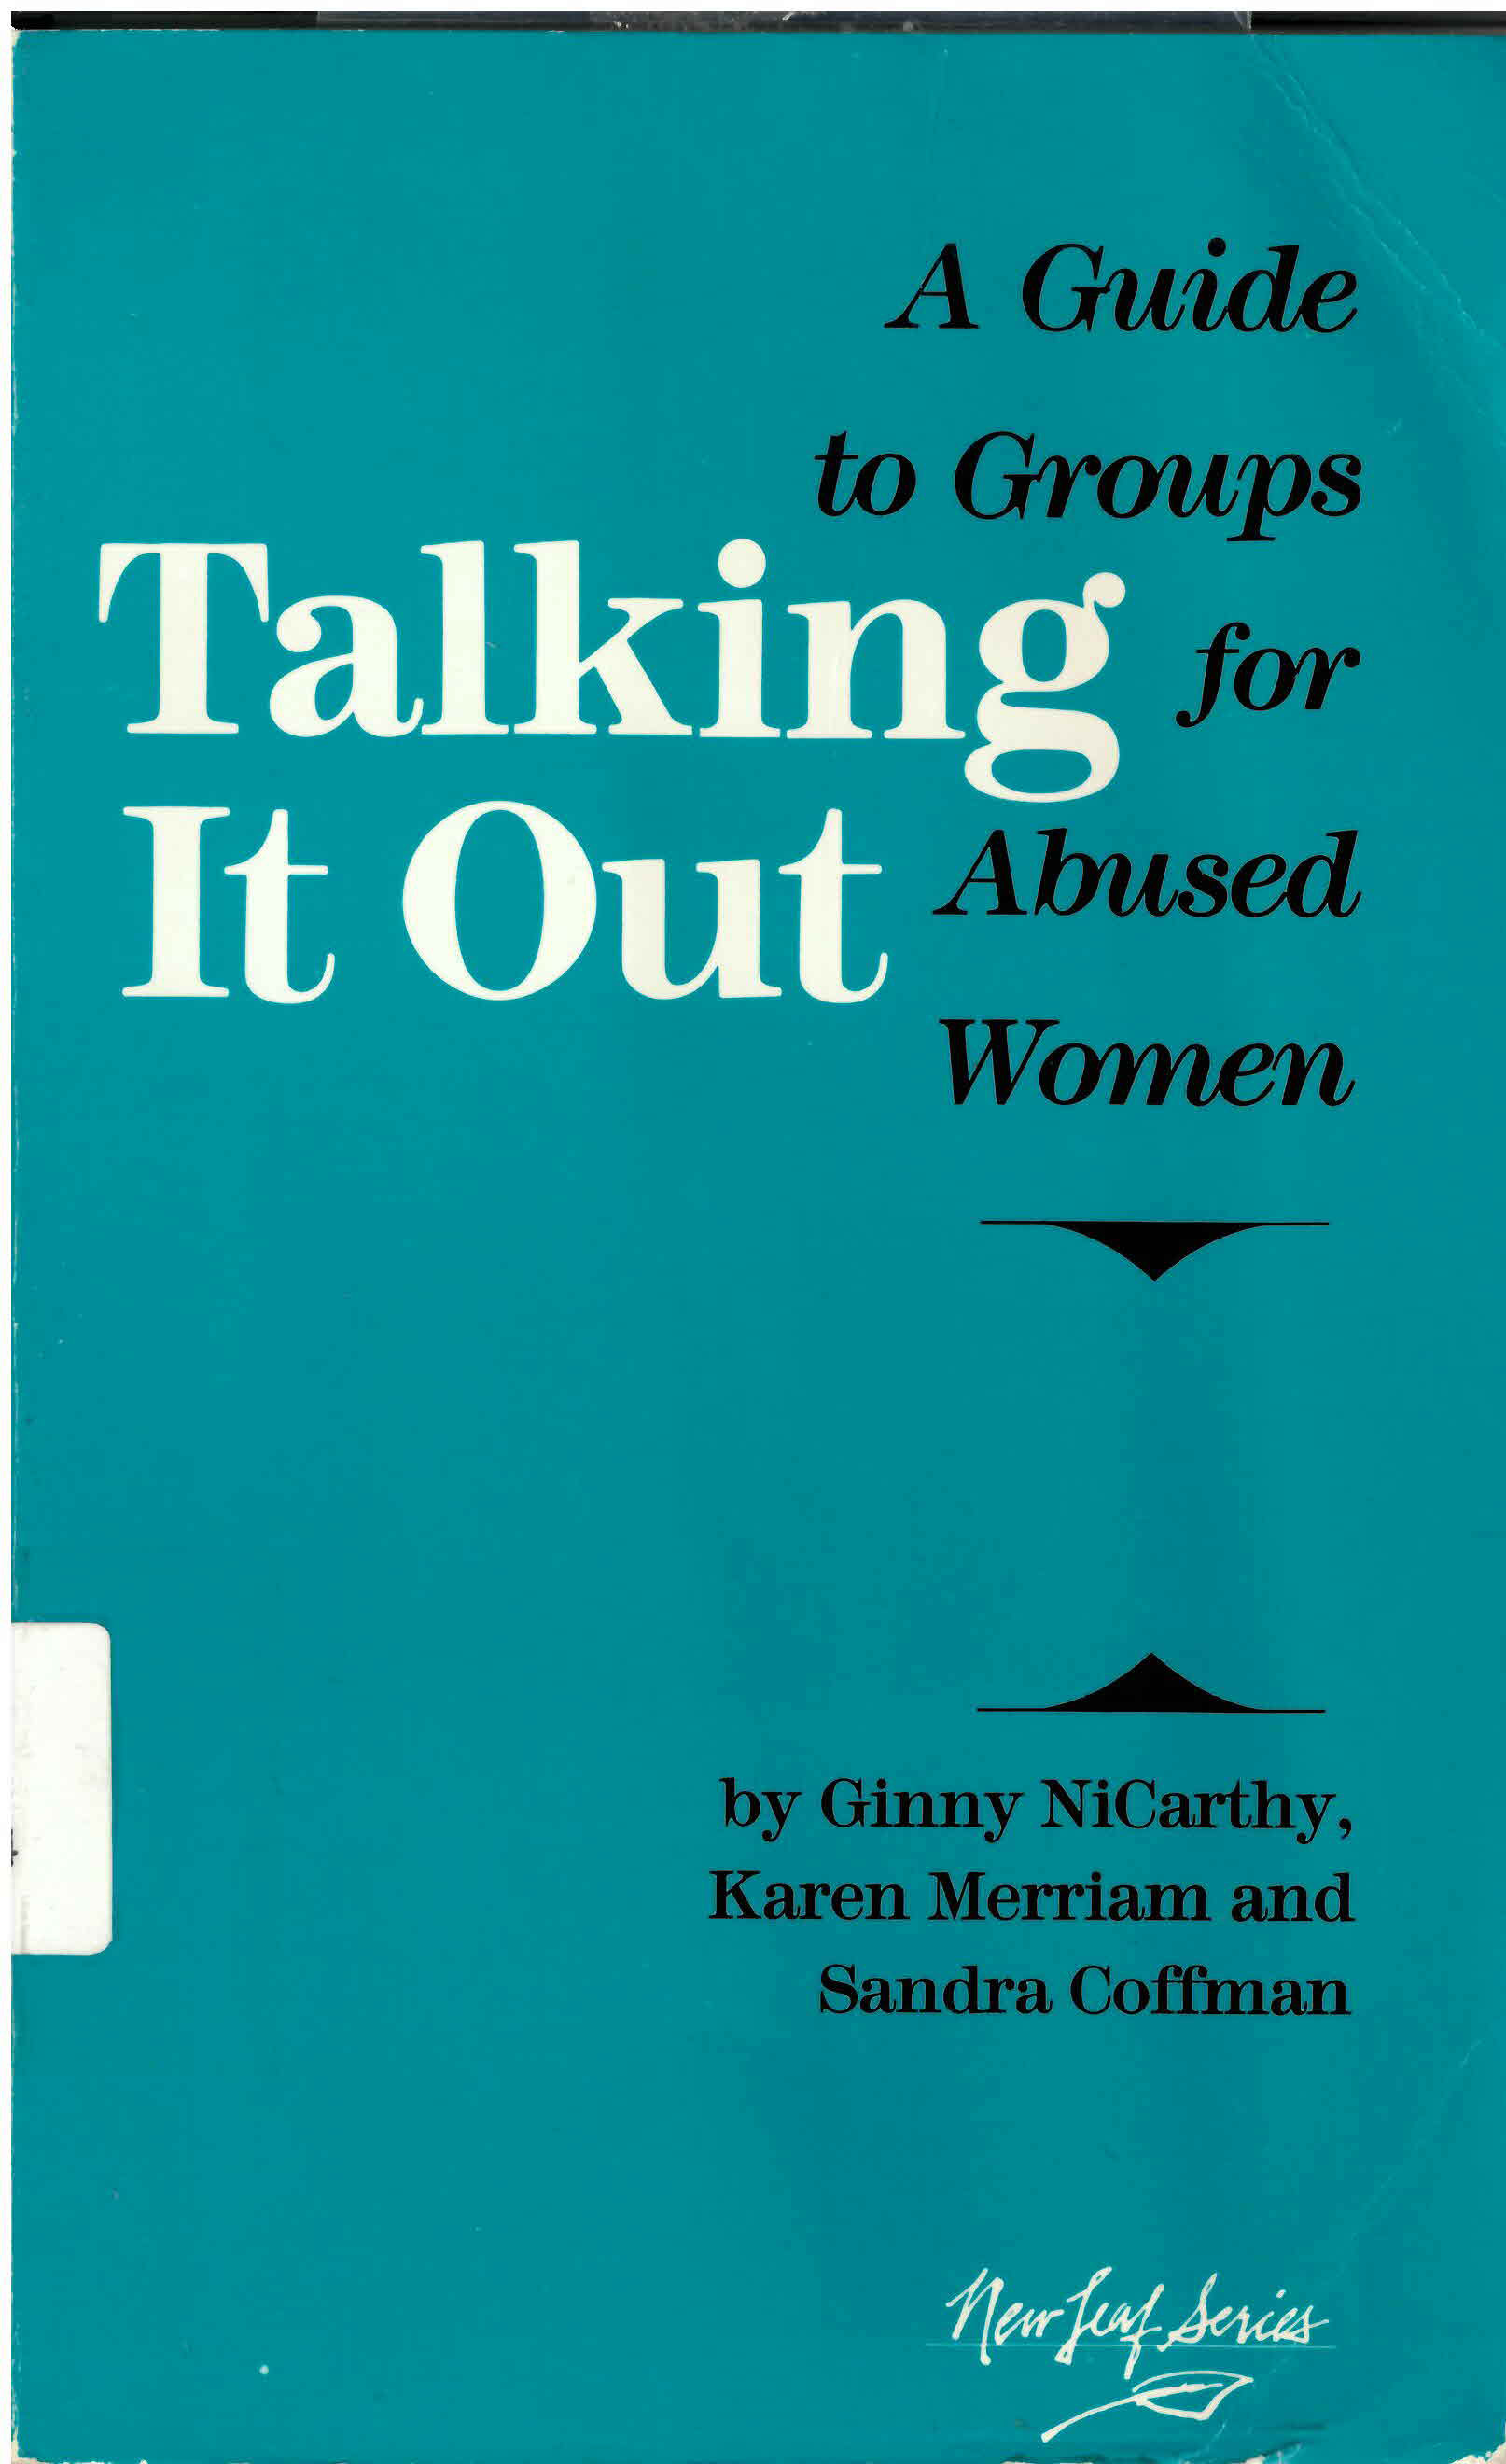 Talking it out : guide to groups for abused women